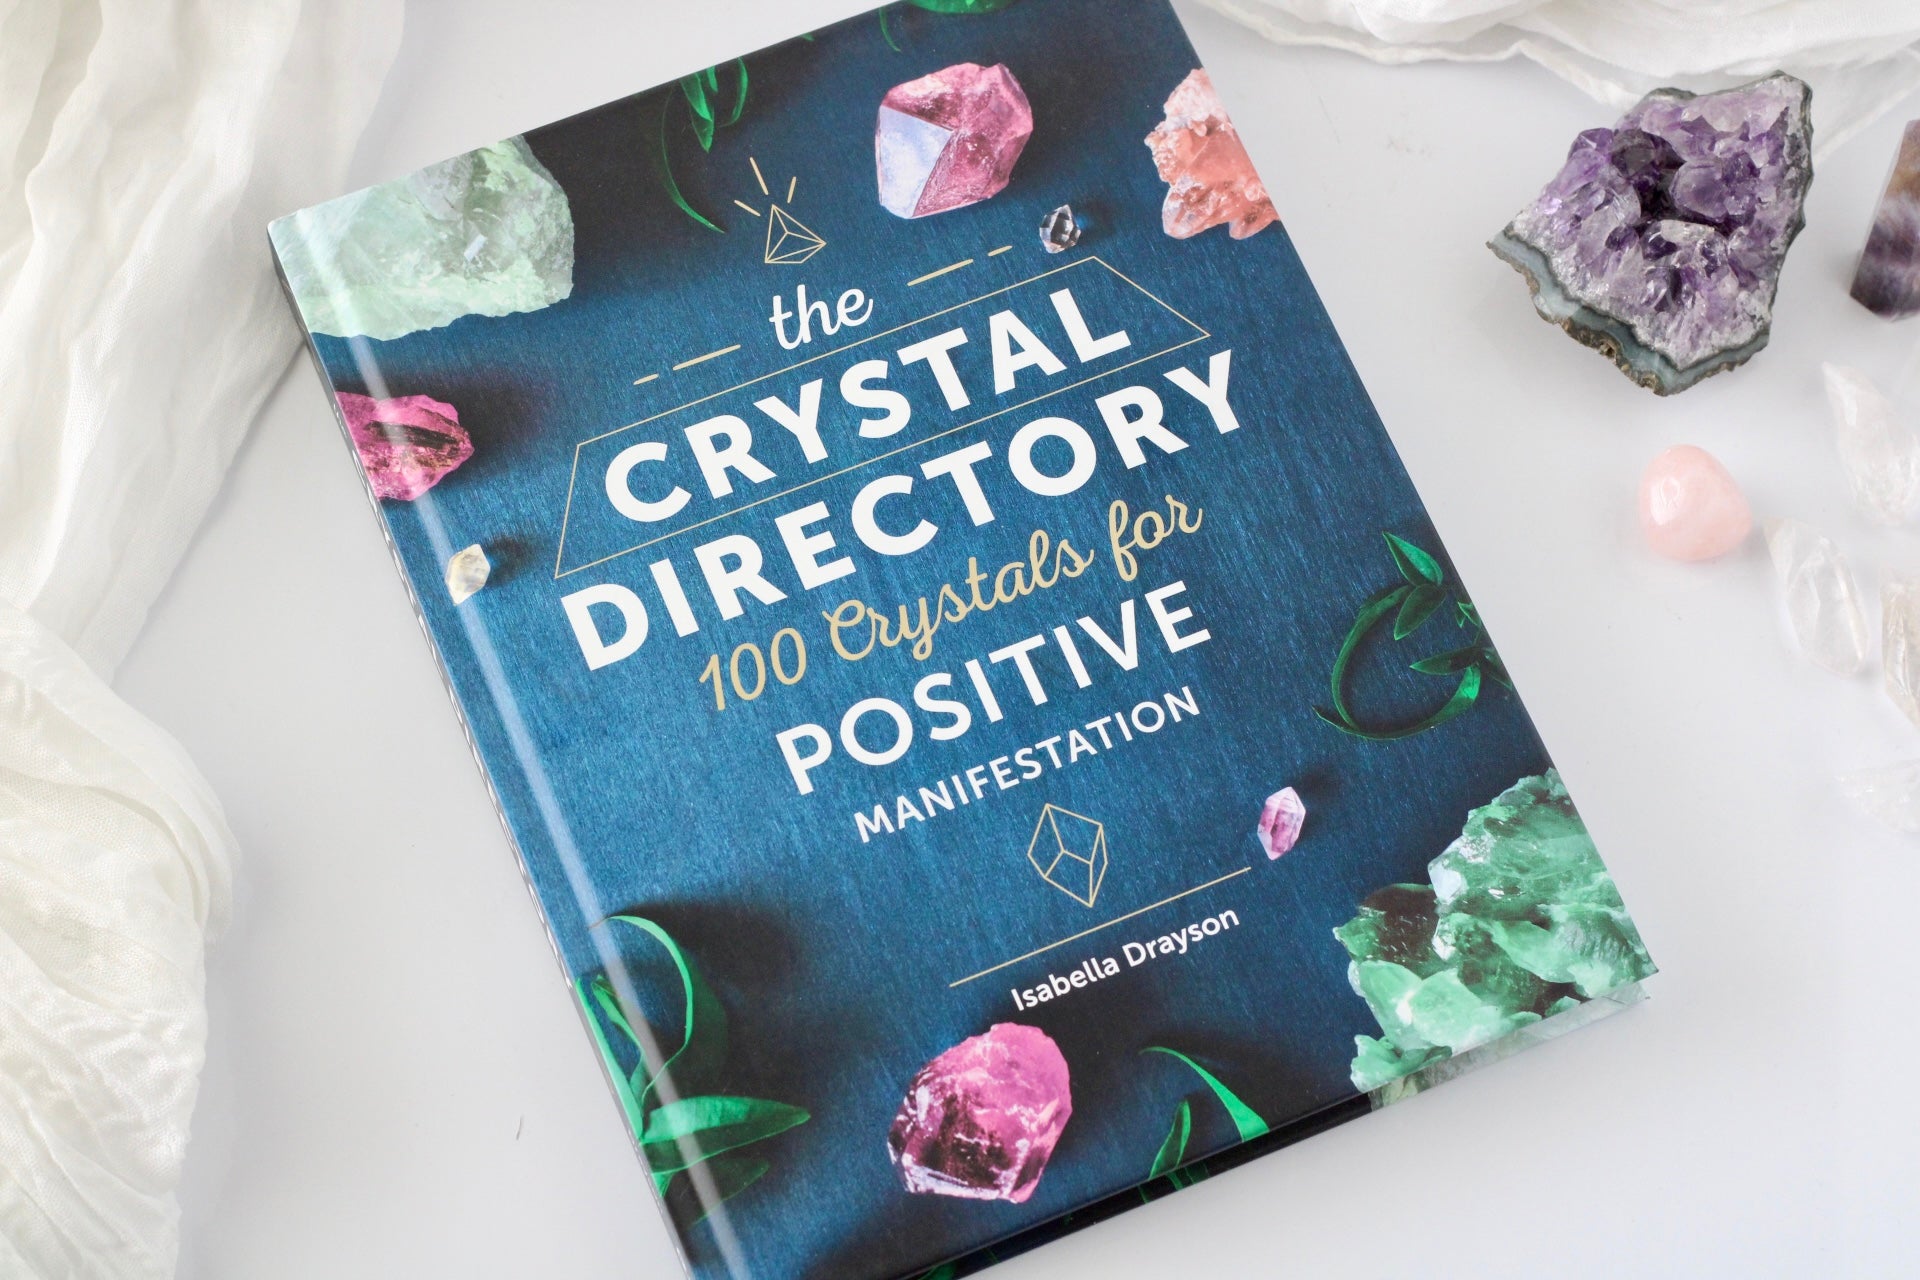 Crystal Directory: 100 Crystals For Positive Manifestation by Isabella Drayson